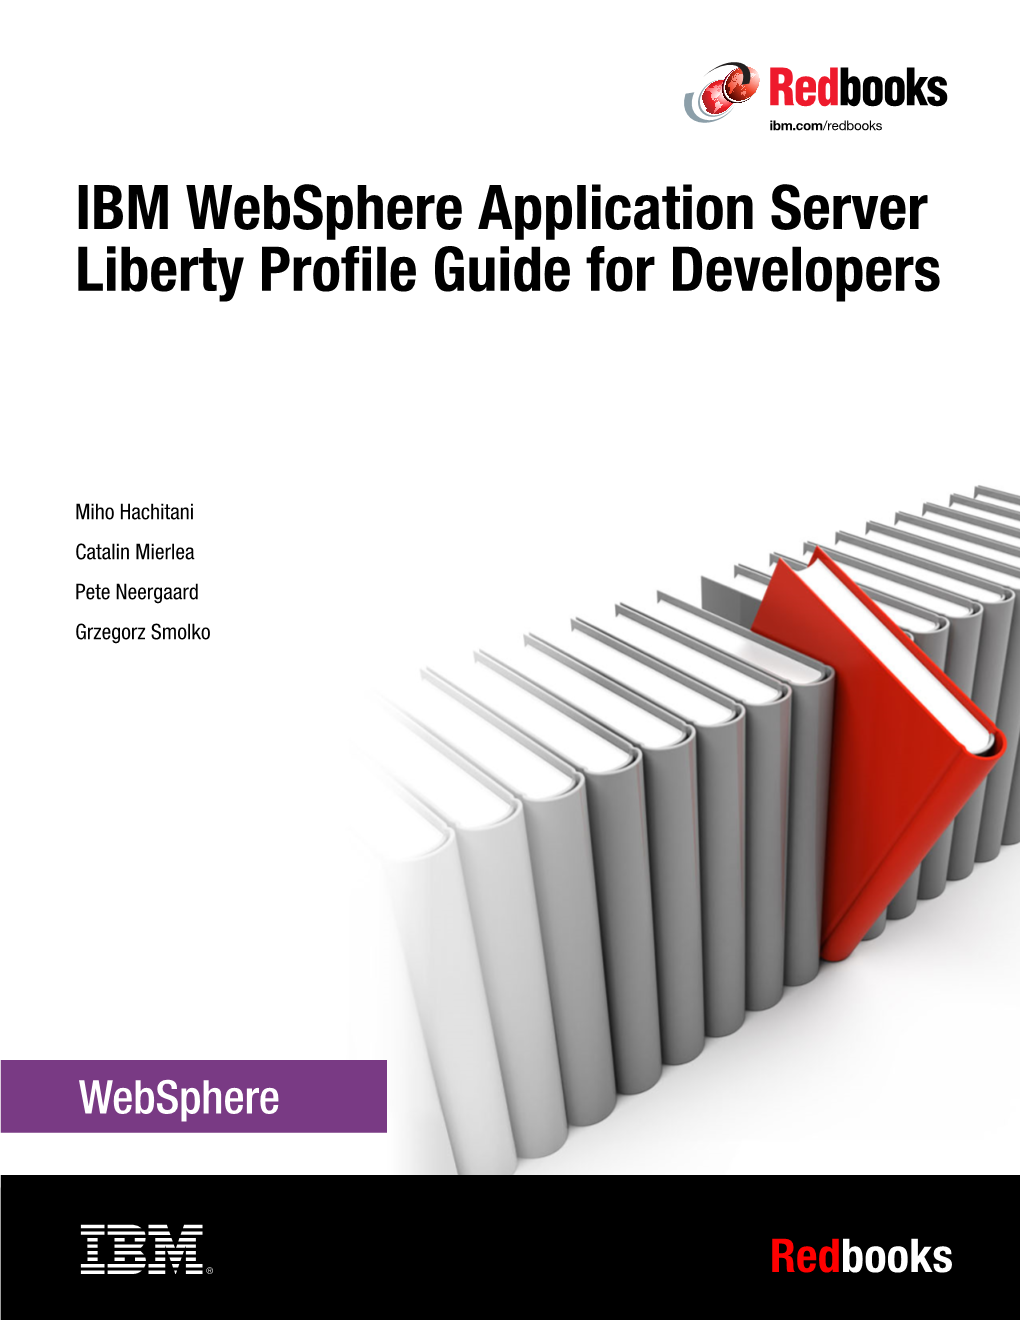 IBM Websphere Application Server Liberty Profile Guide for Developers